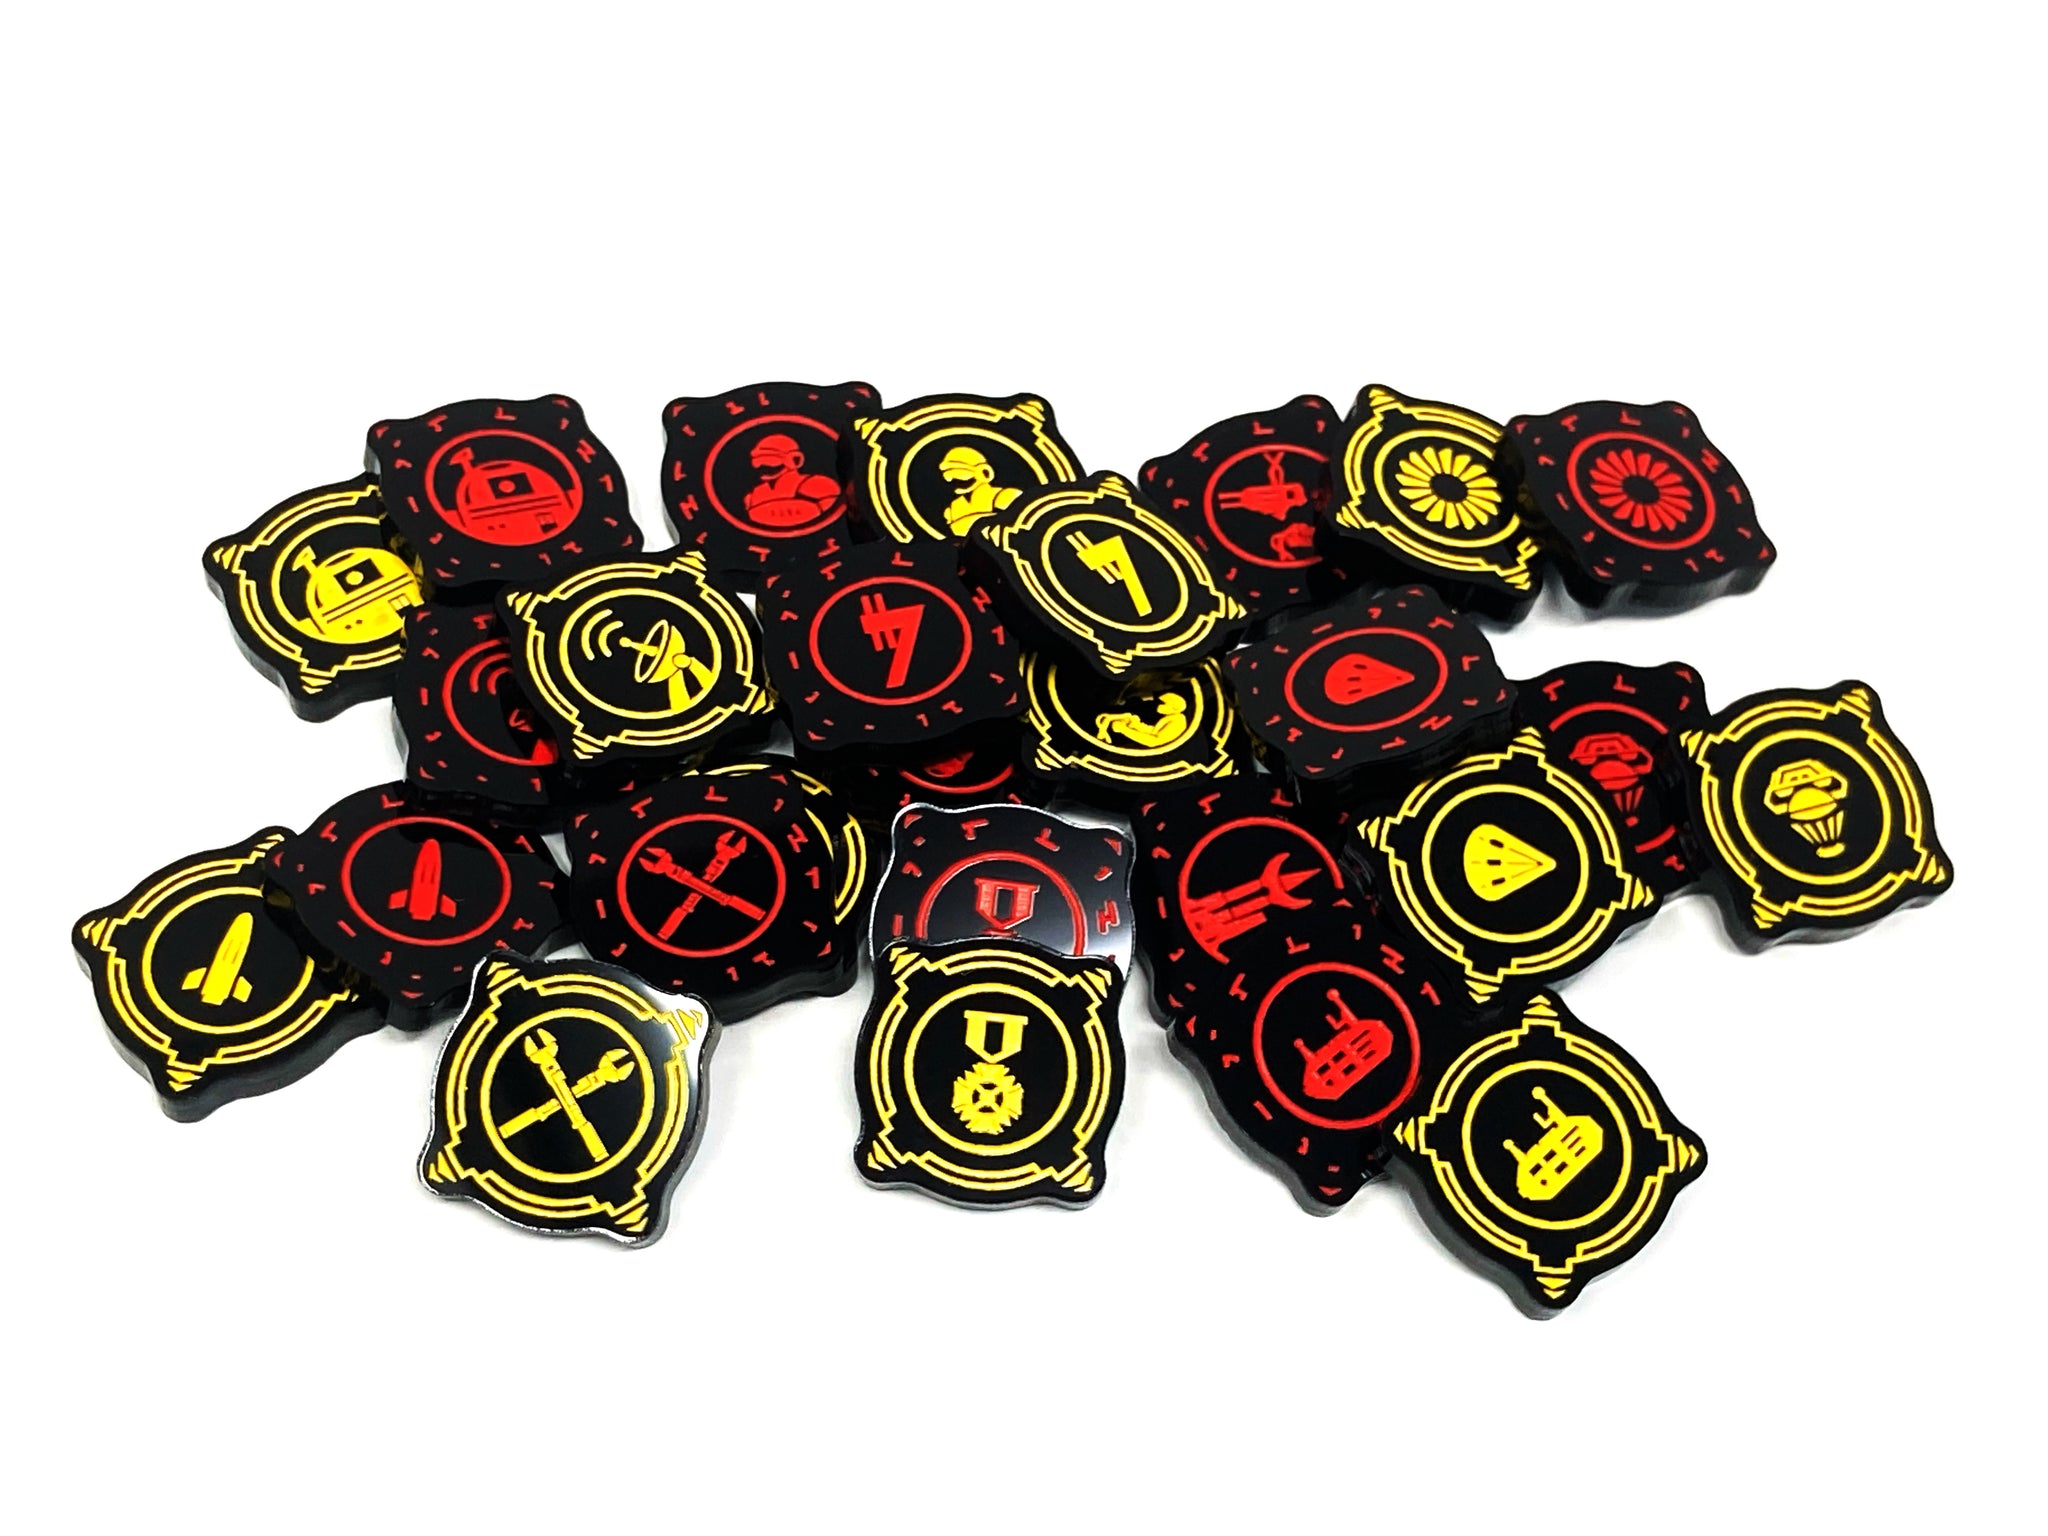 2 x Crew Charge Tokens - Black Series (Double Sided)